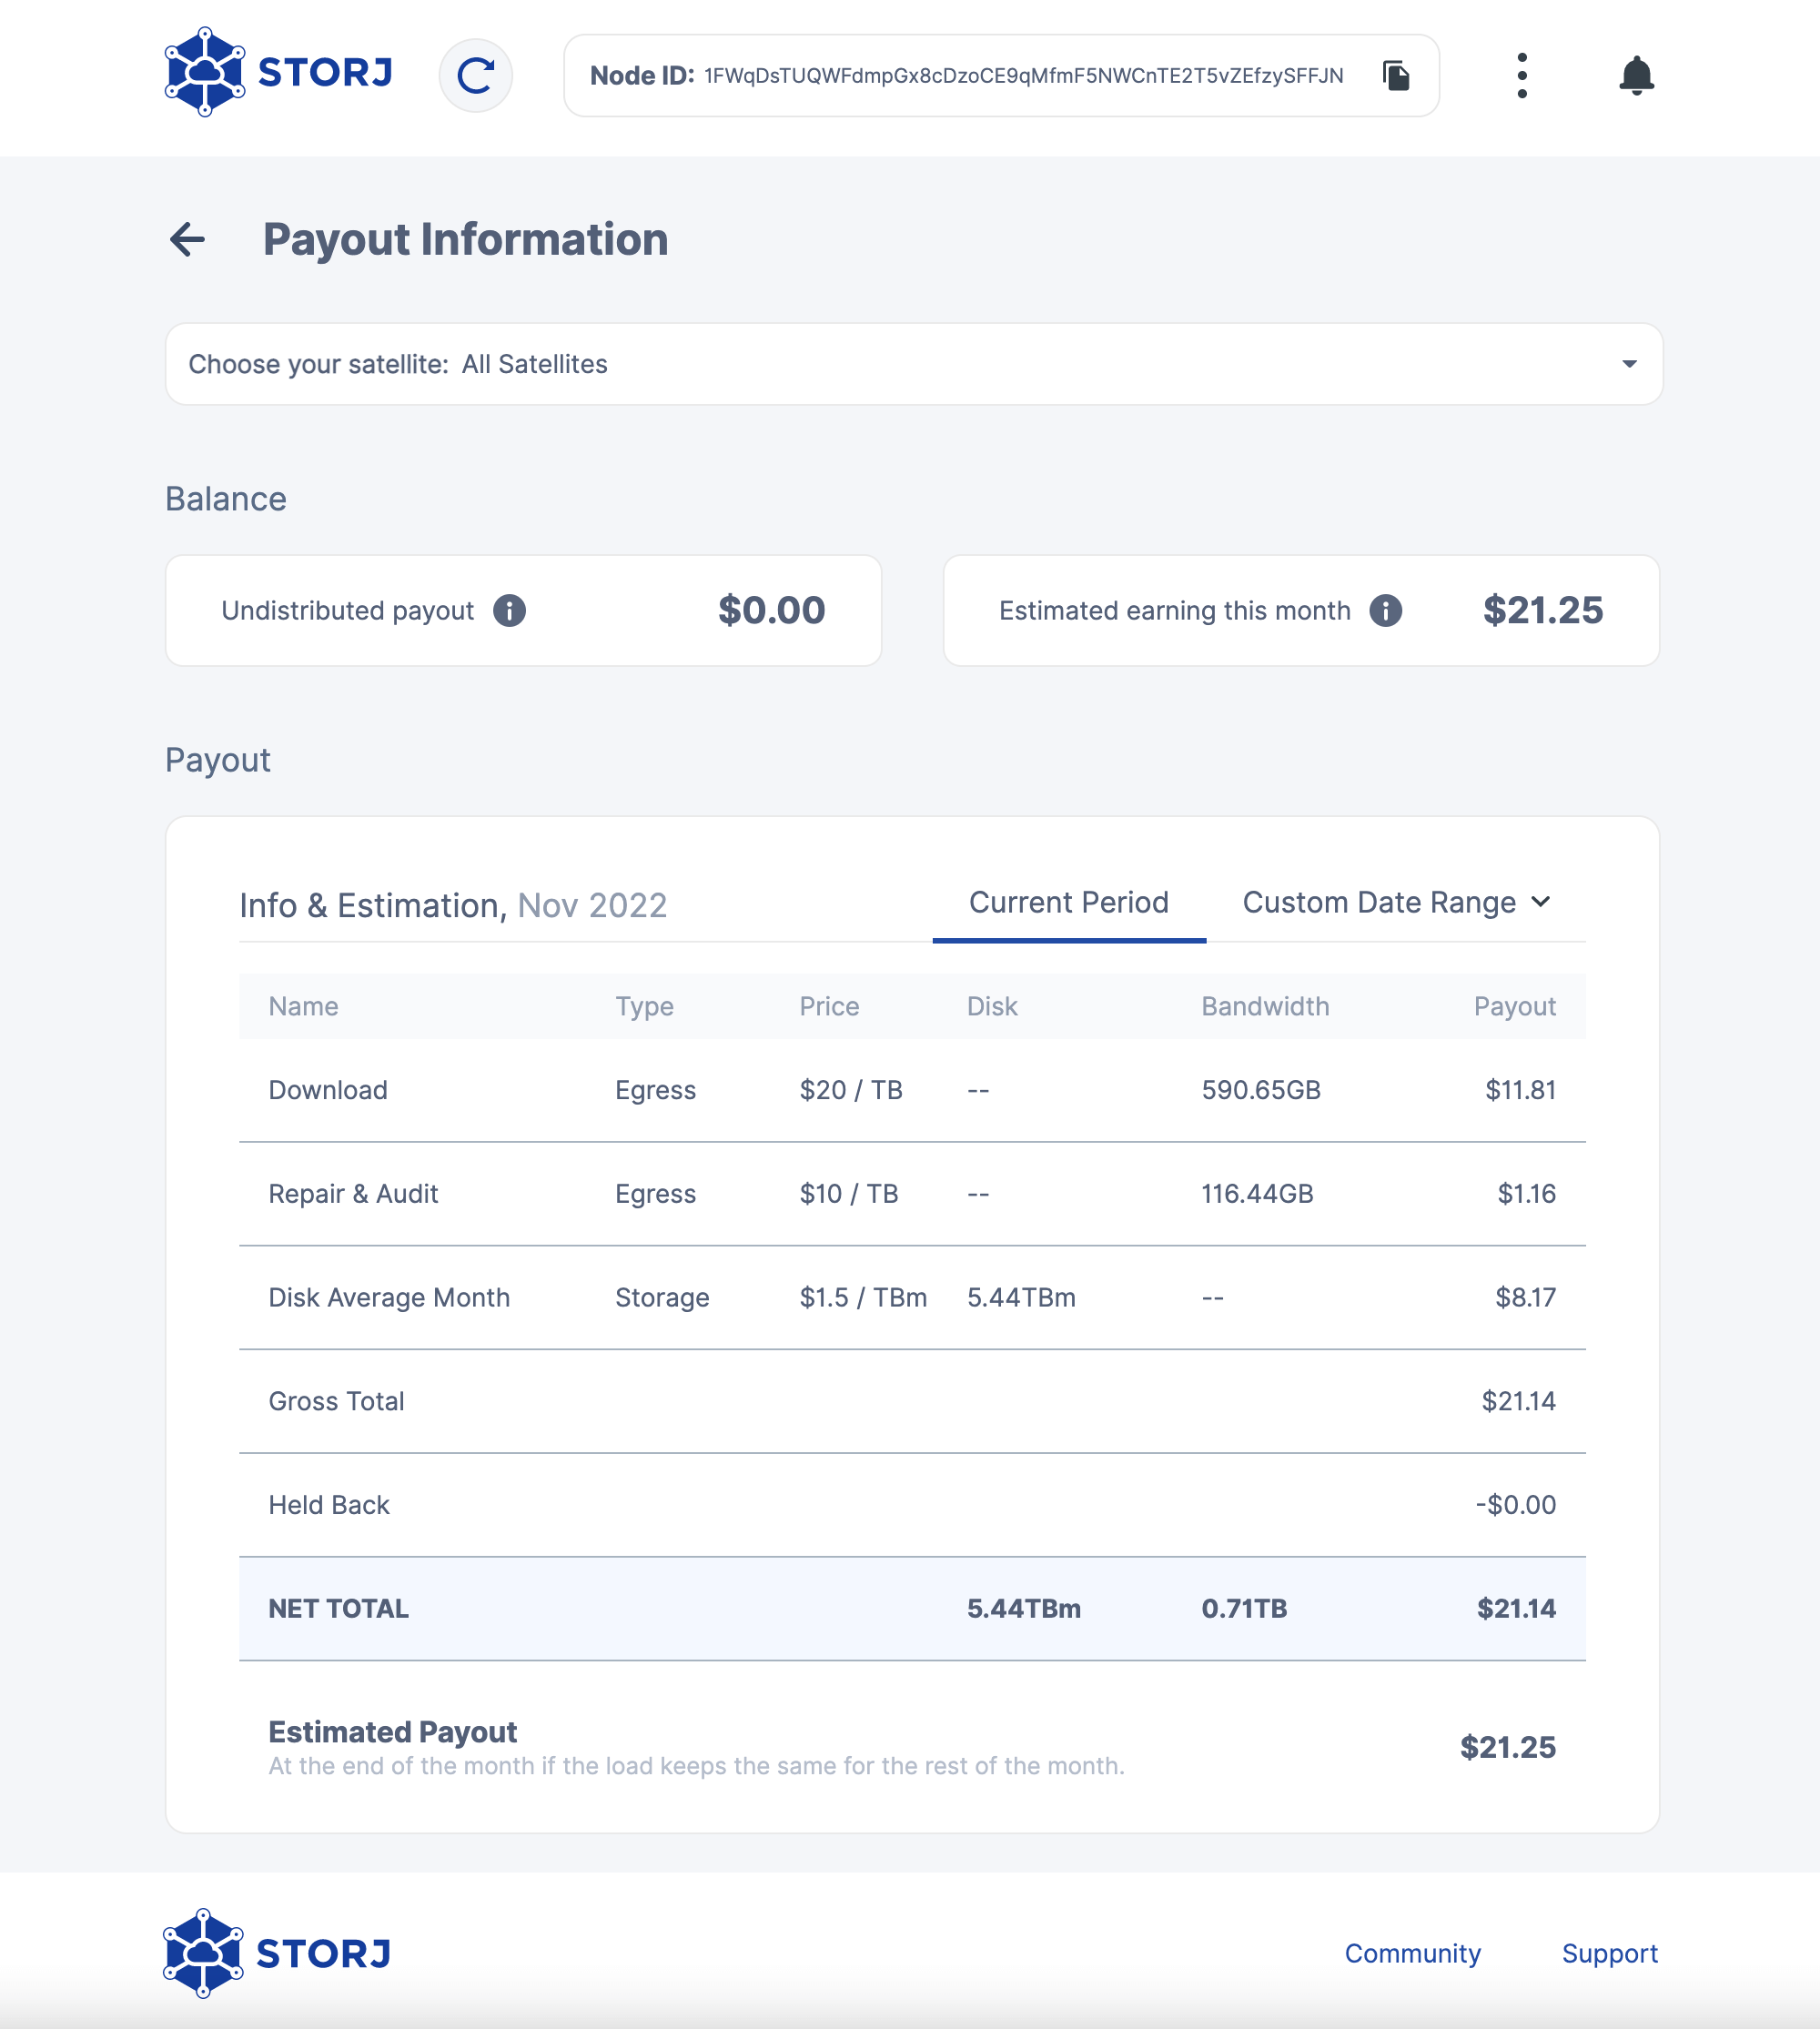 Storj Payout Information Ende November 2022. Download Payout: $11.81, Repair & Audit Payout: $1.16, Disk Average Month Payout: $8.17, Net Total: $21.14, Estimated Payout: $21.25